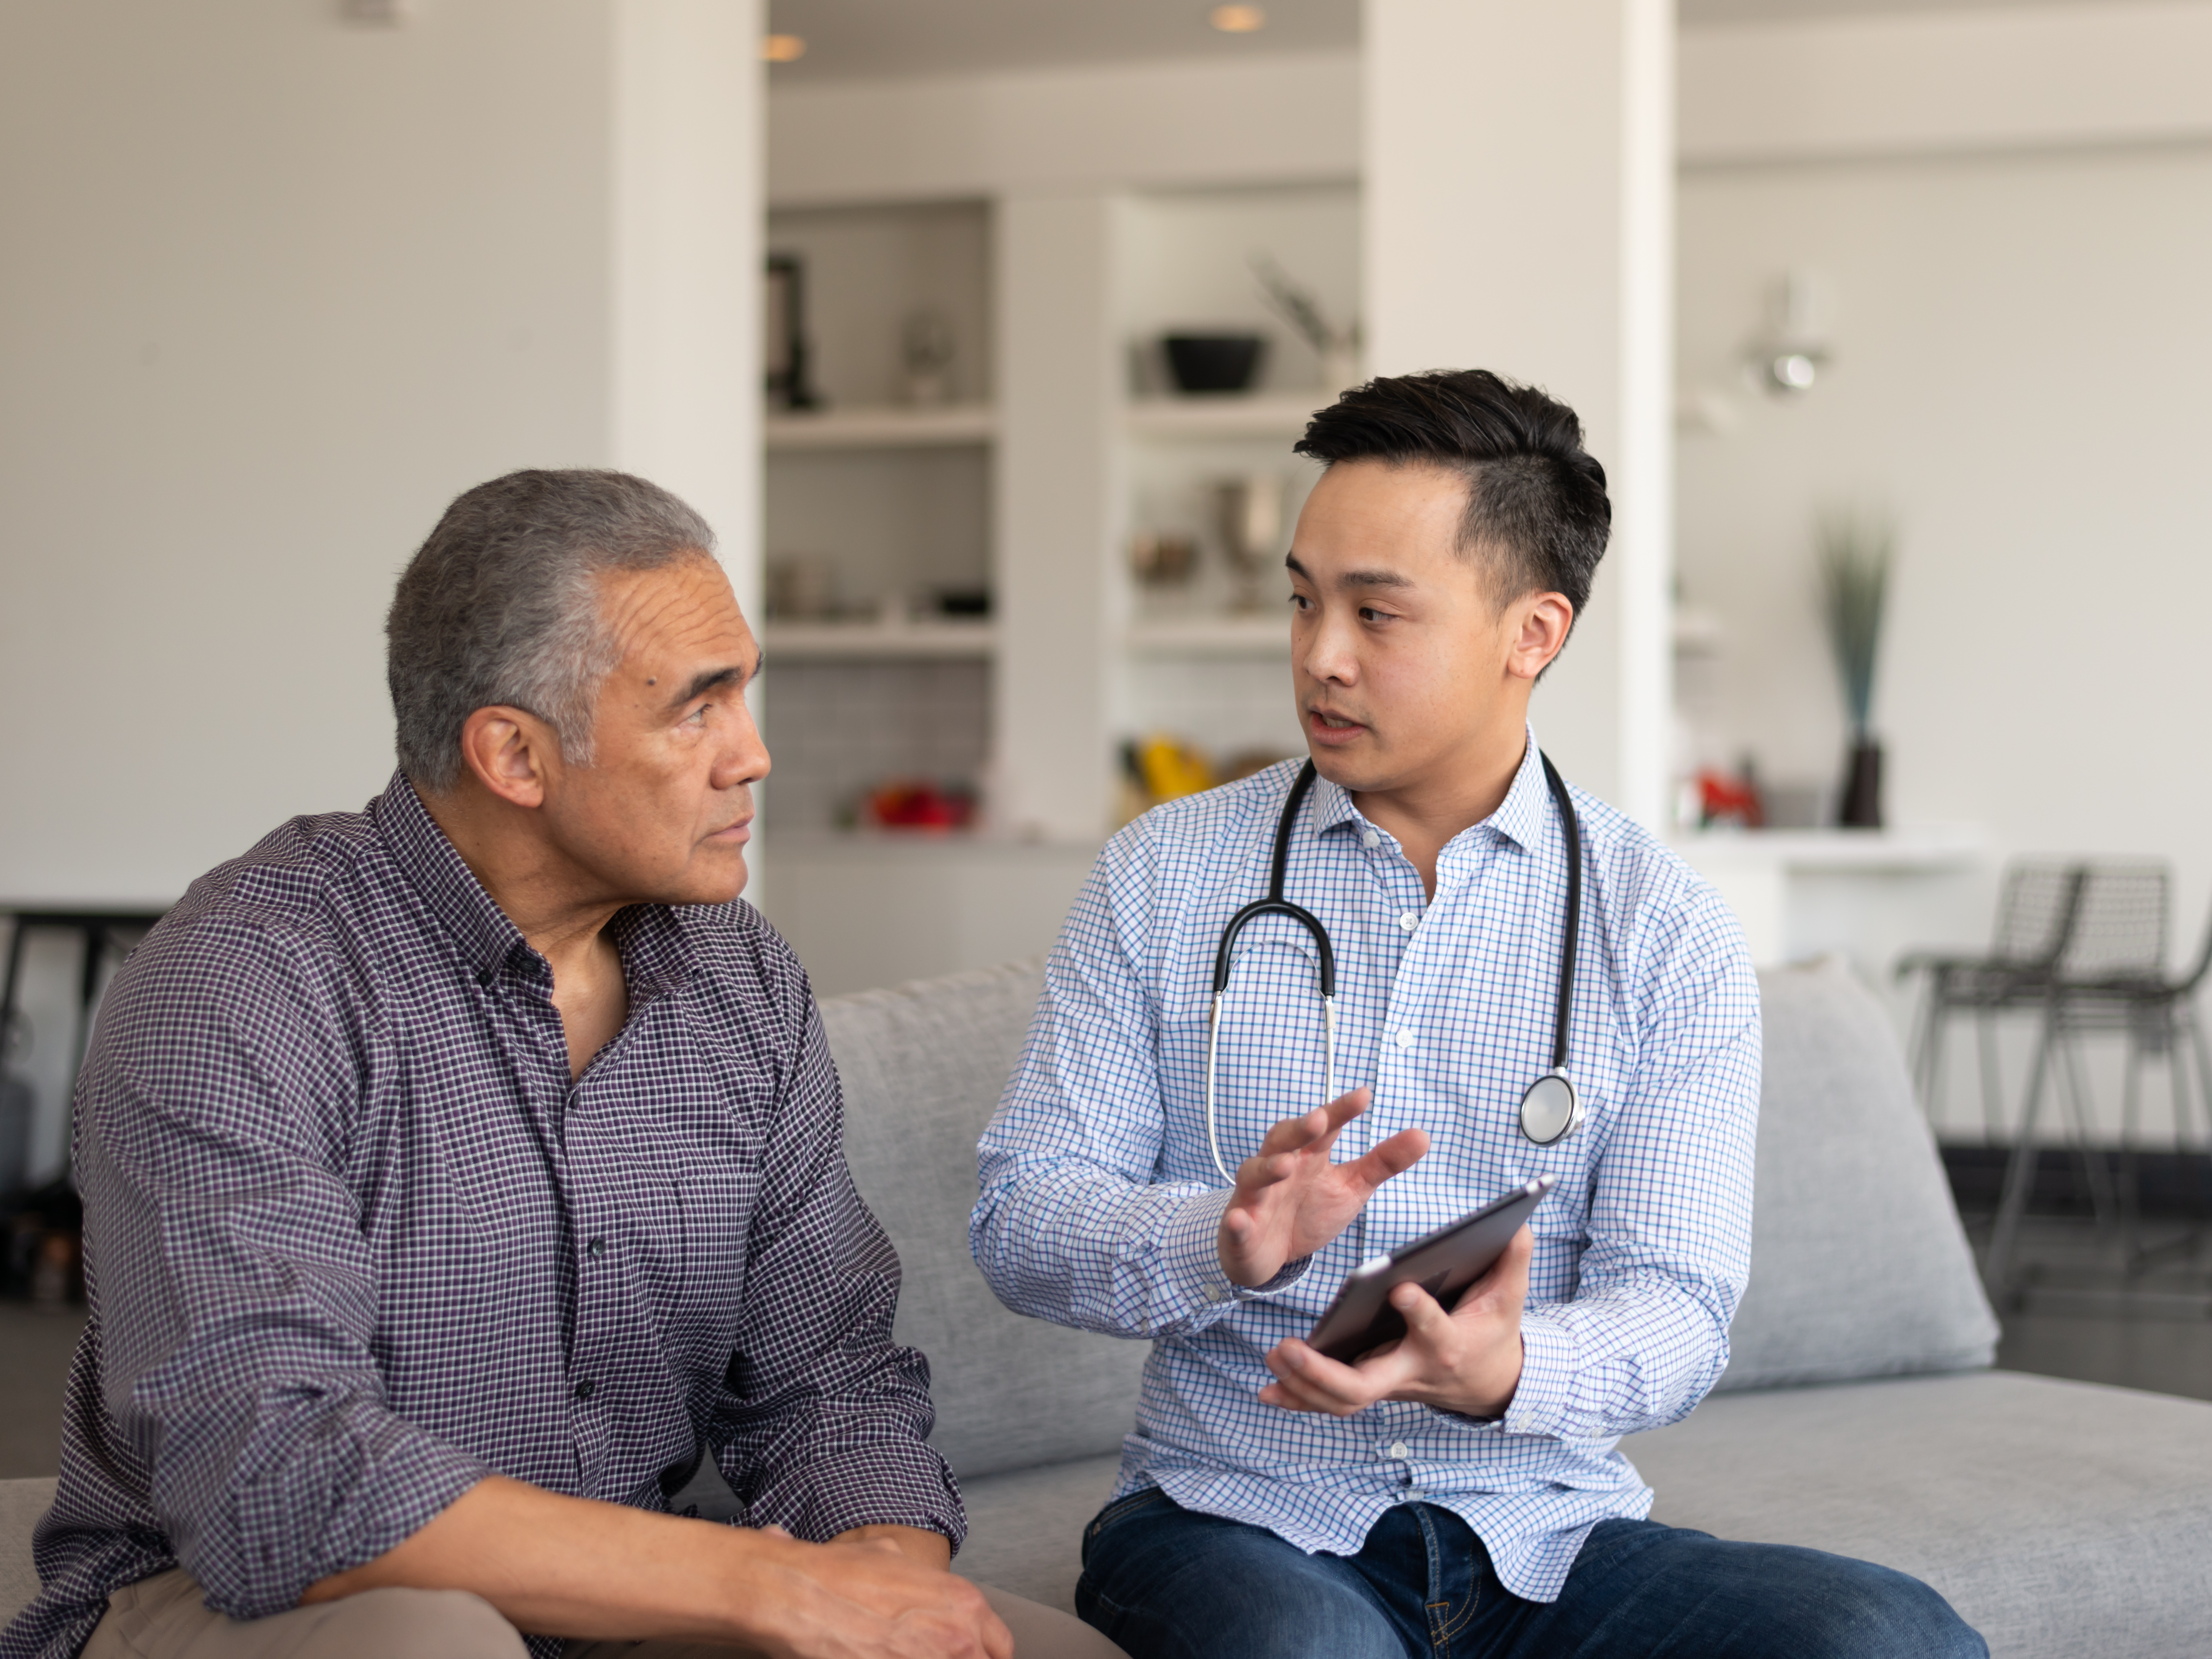 Asian provider consults older patient